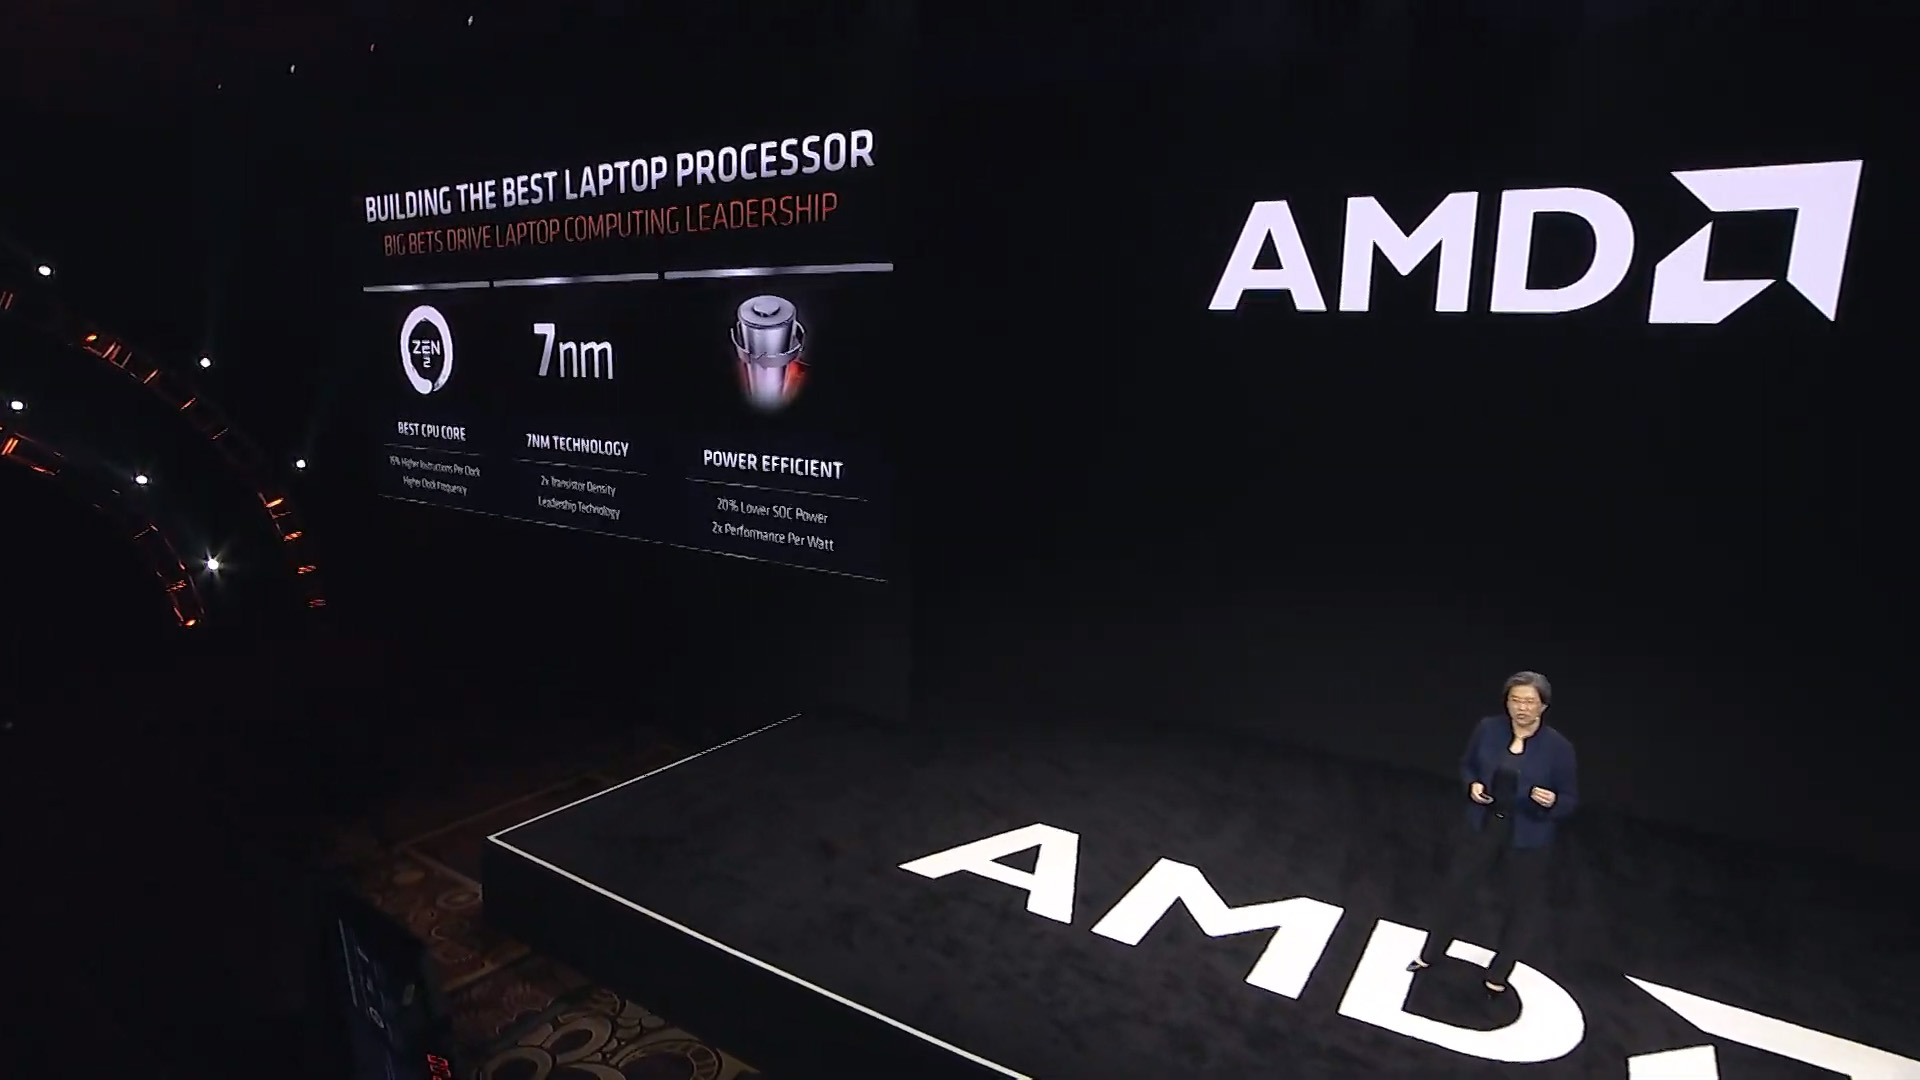 AMD CES 2020 conference with Dr. Lisa Su on stage